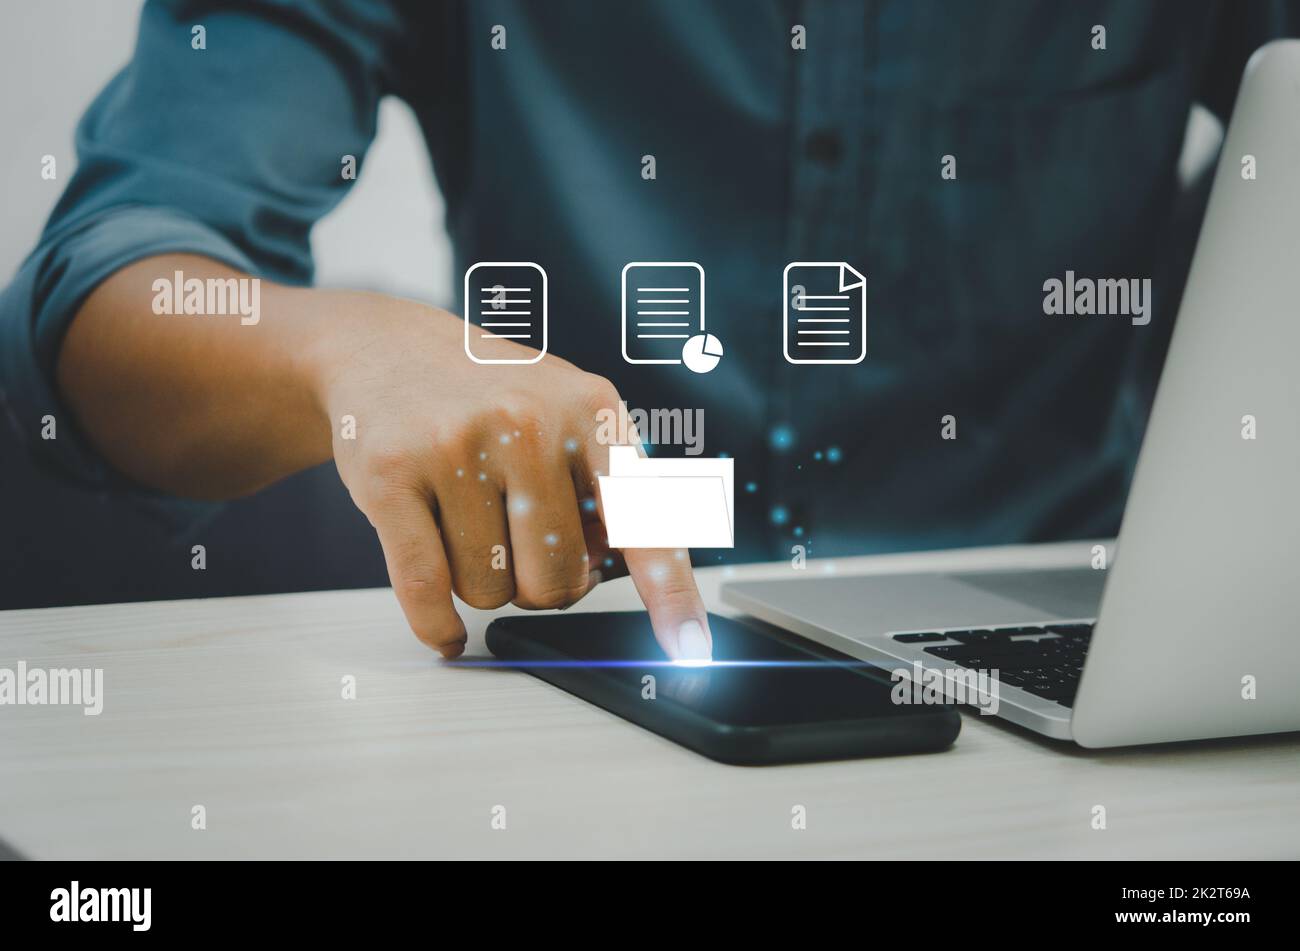 Businessman touching on icons on virtual screen Enterprise Resource Planning ERP document management.Document Management System DMS concept. Stock Photo